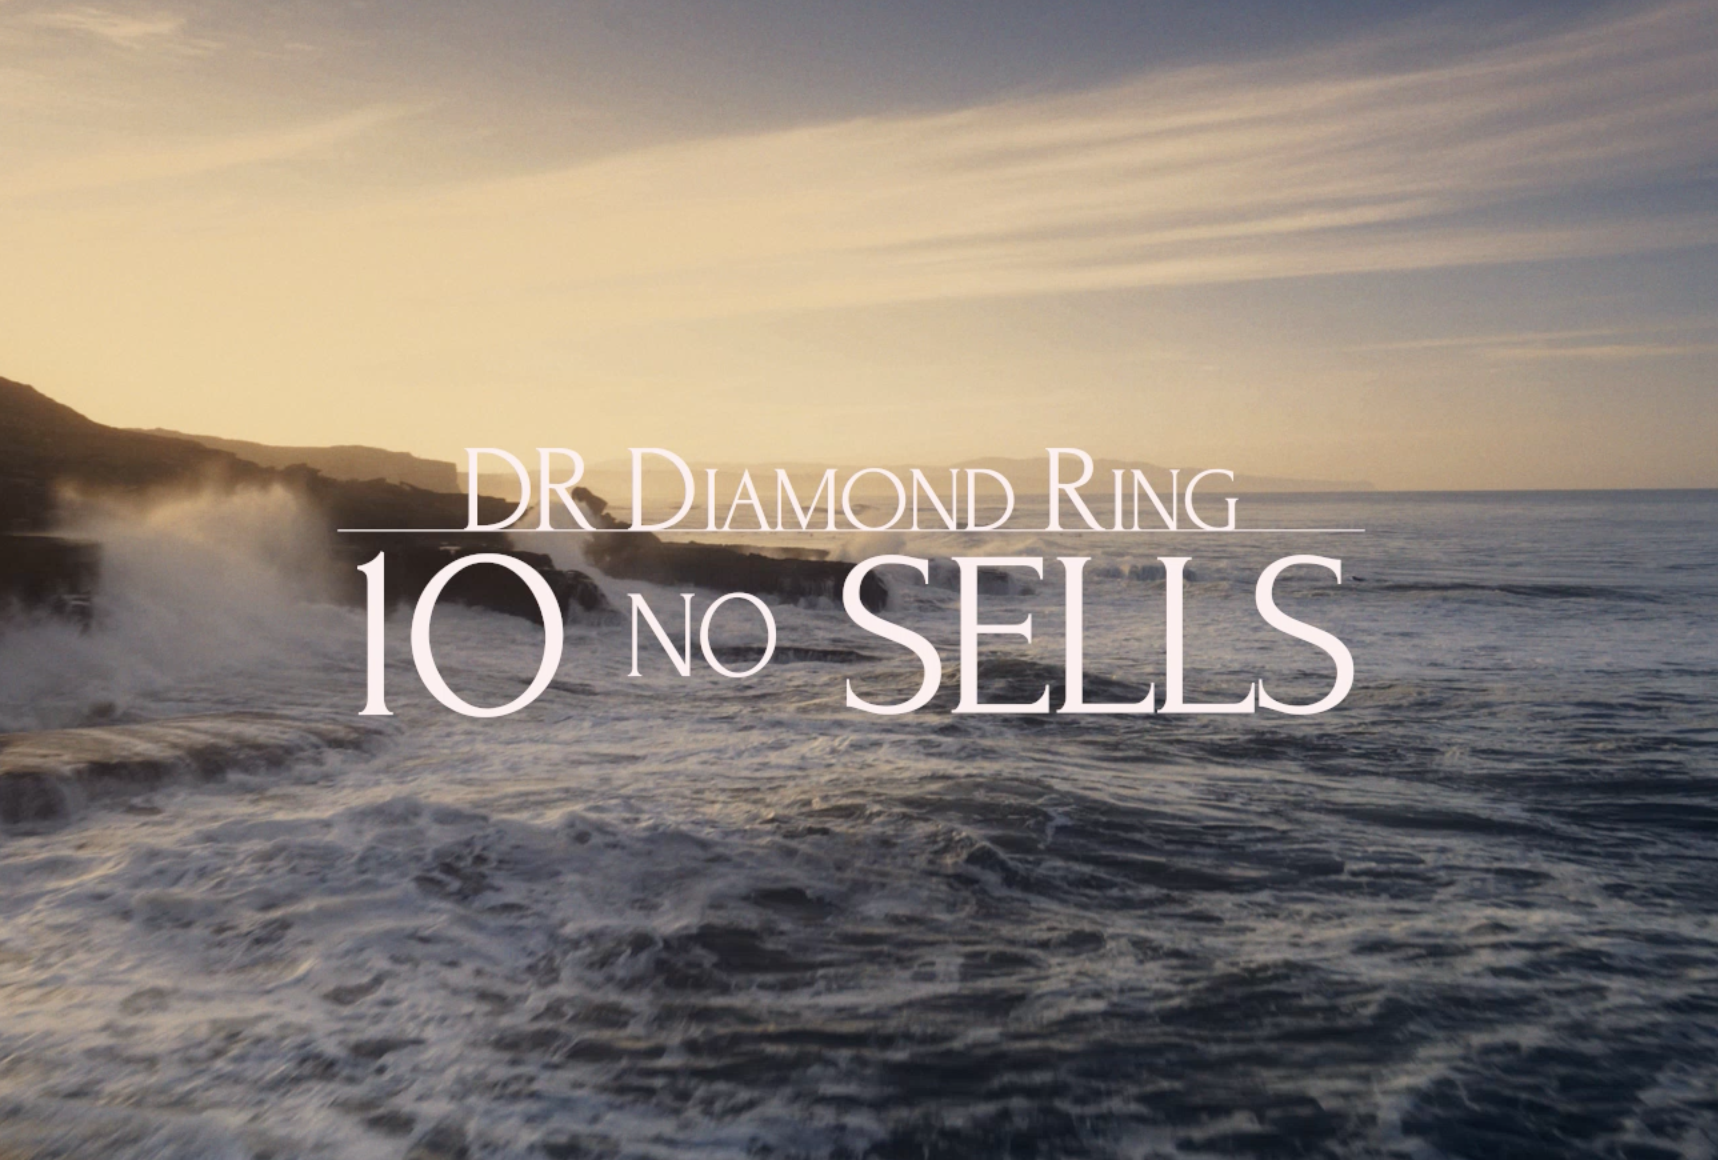 dr diamond ring 10 no sell rules